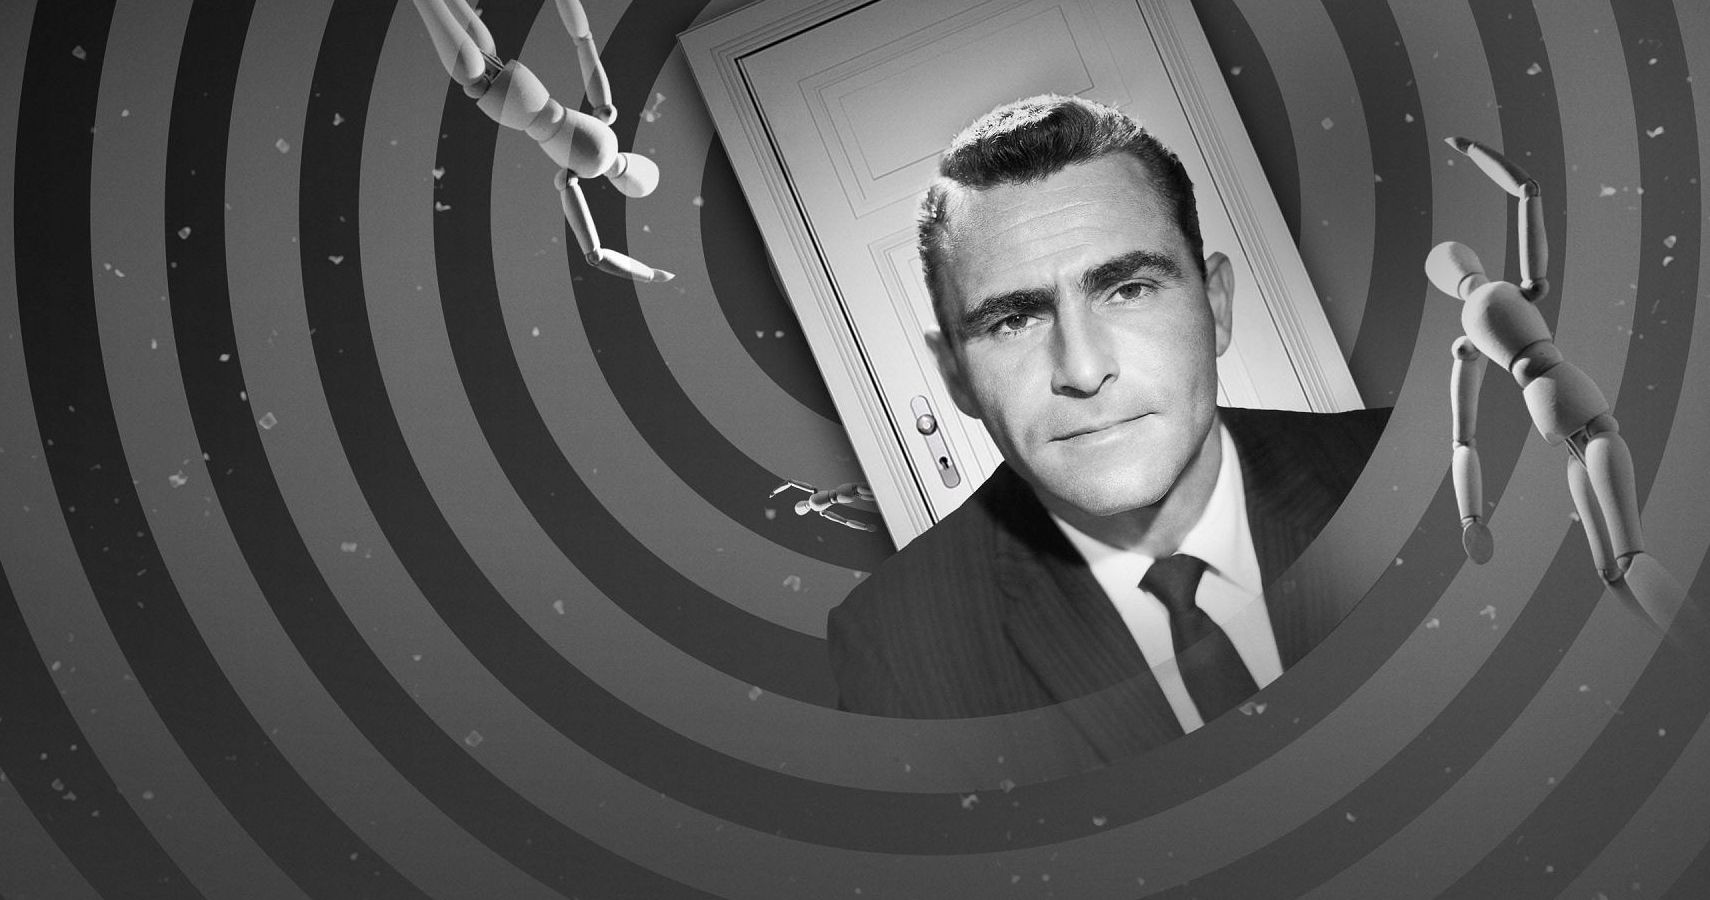 6 Reasons The Twilight Zone Is the Greatest Series in TV History